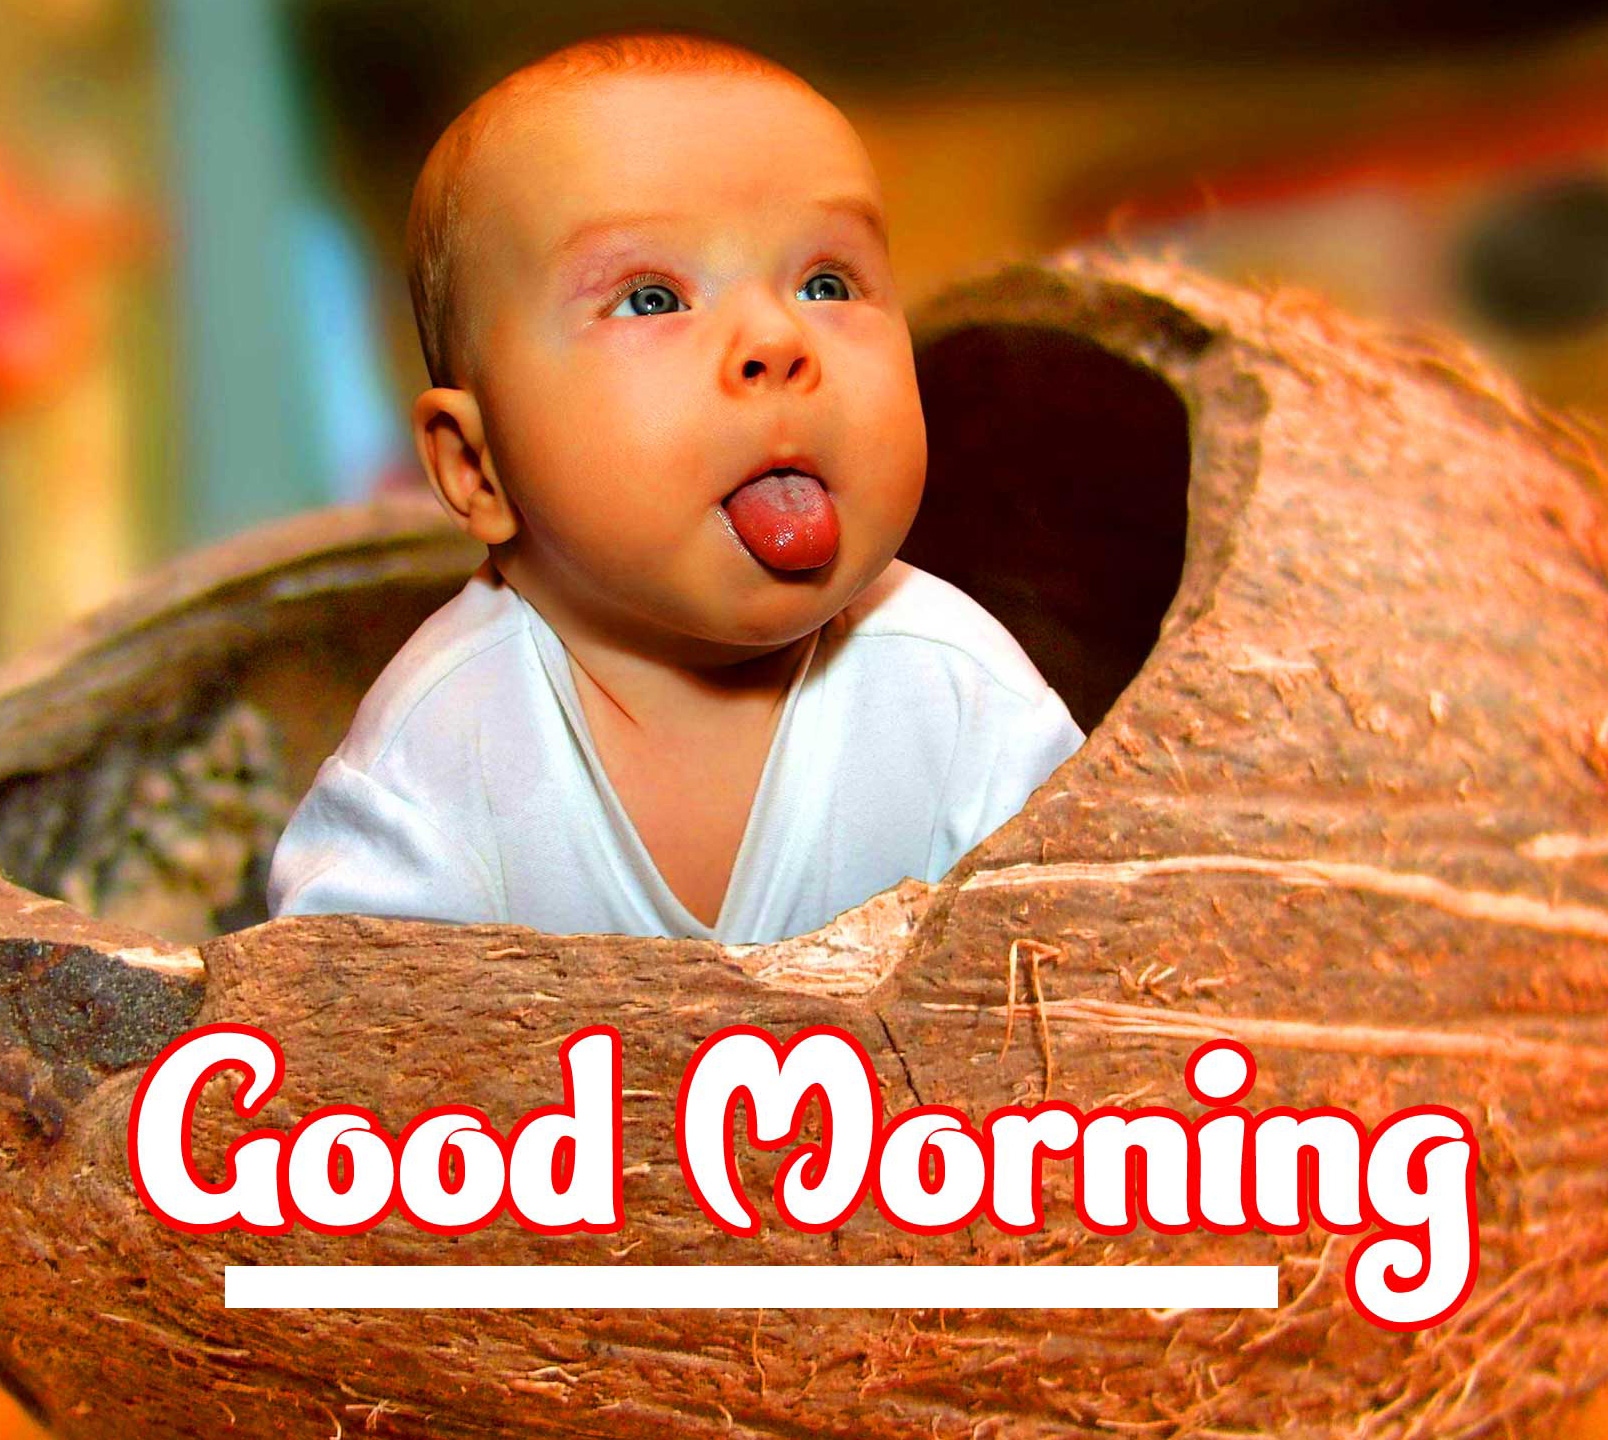 Good Morning Small Baby Images Pics for Facebook